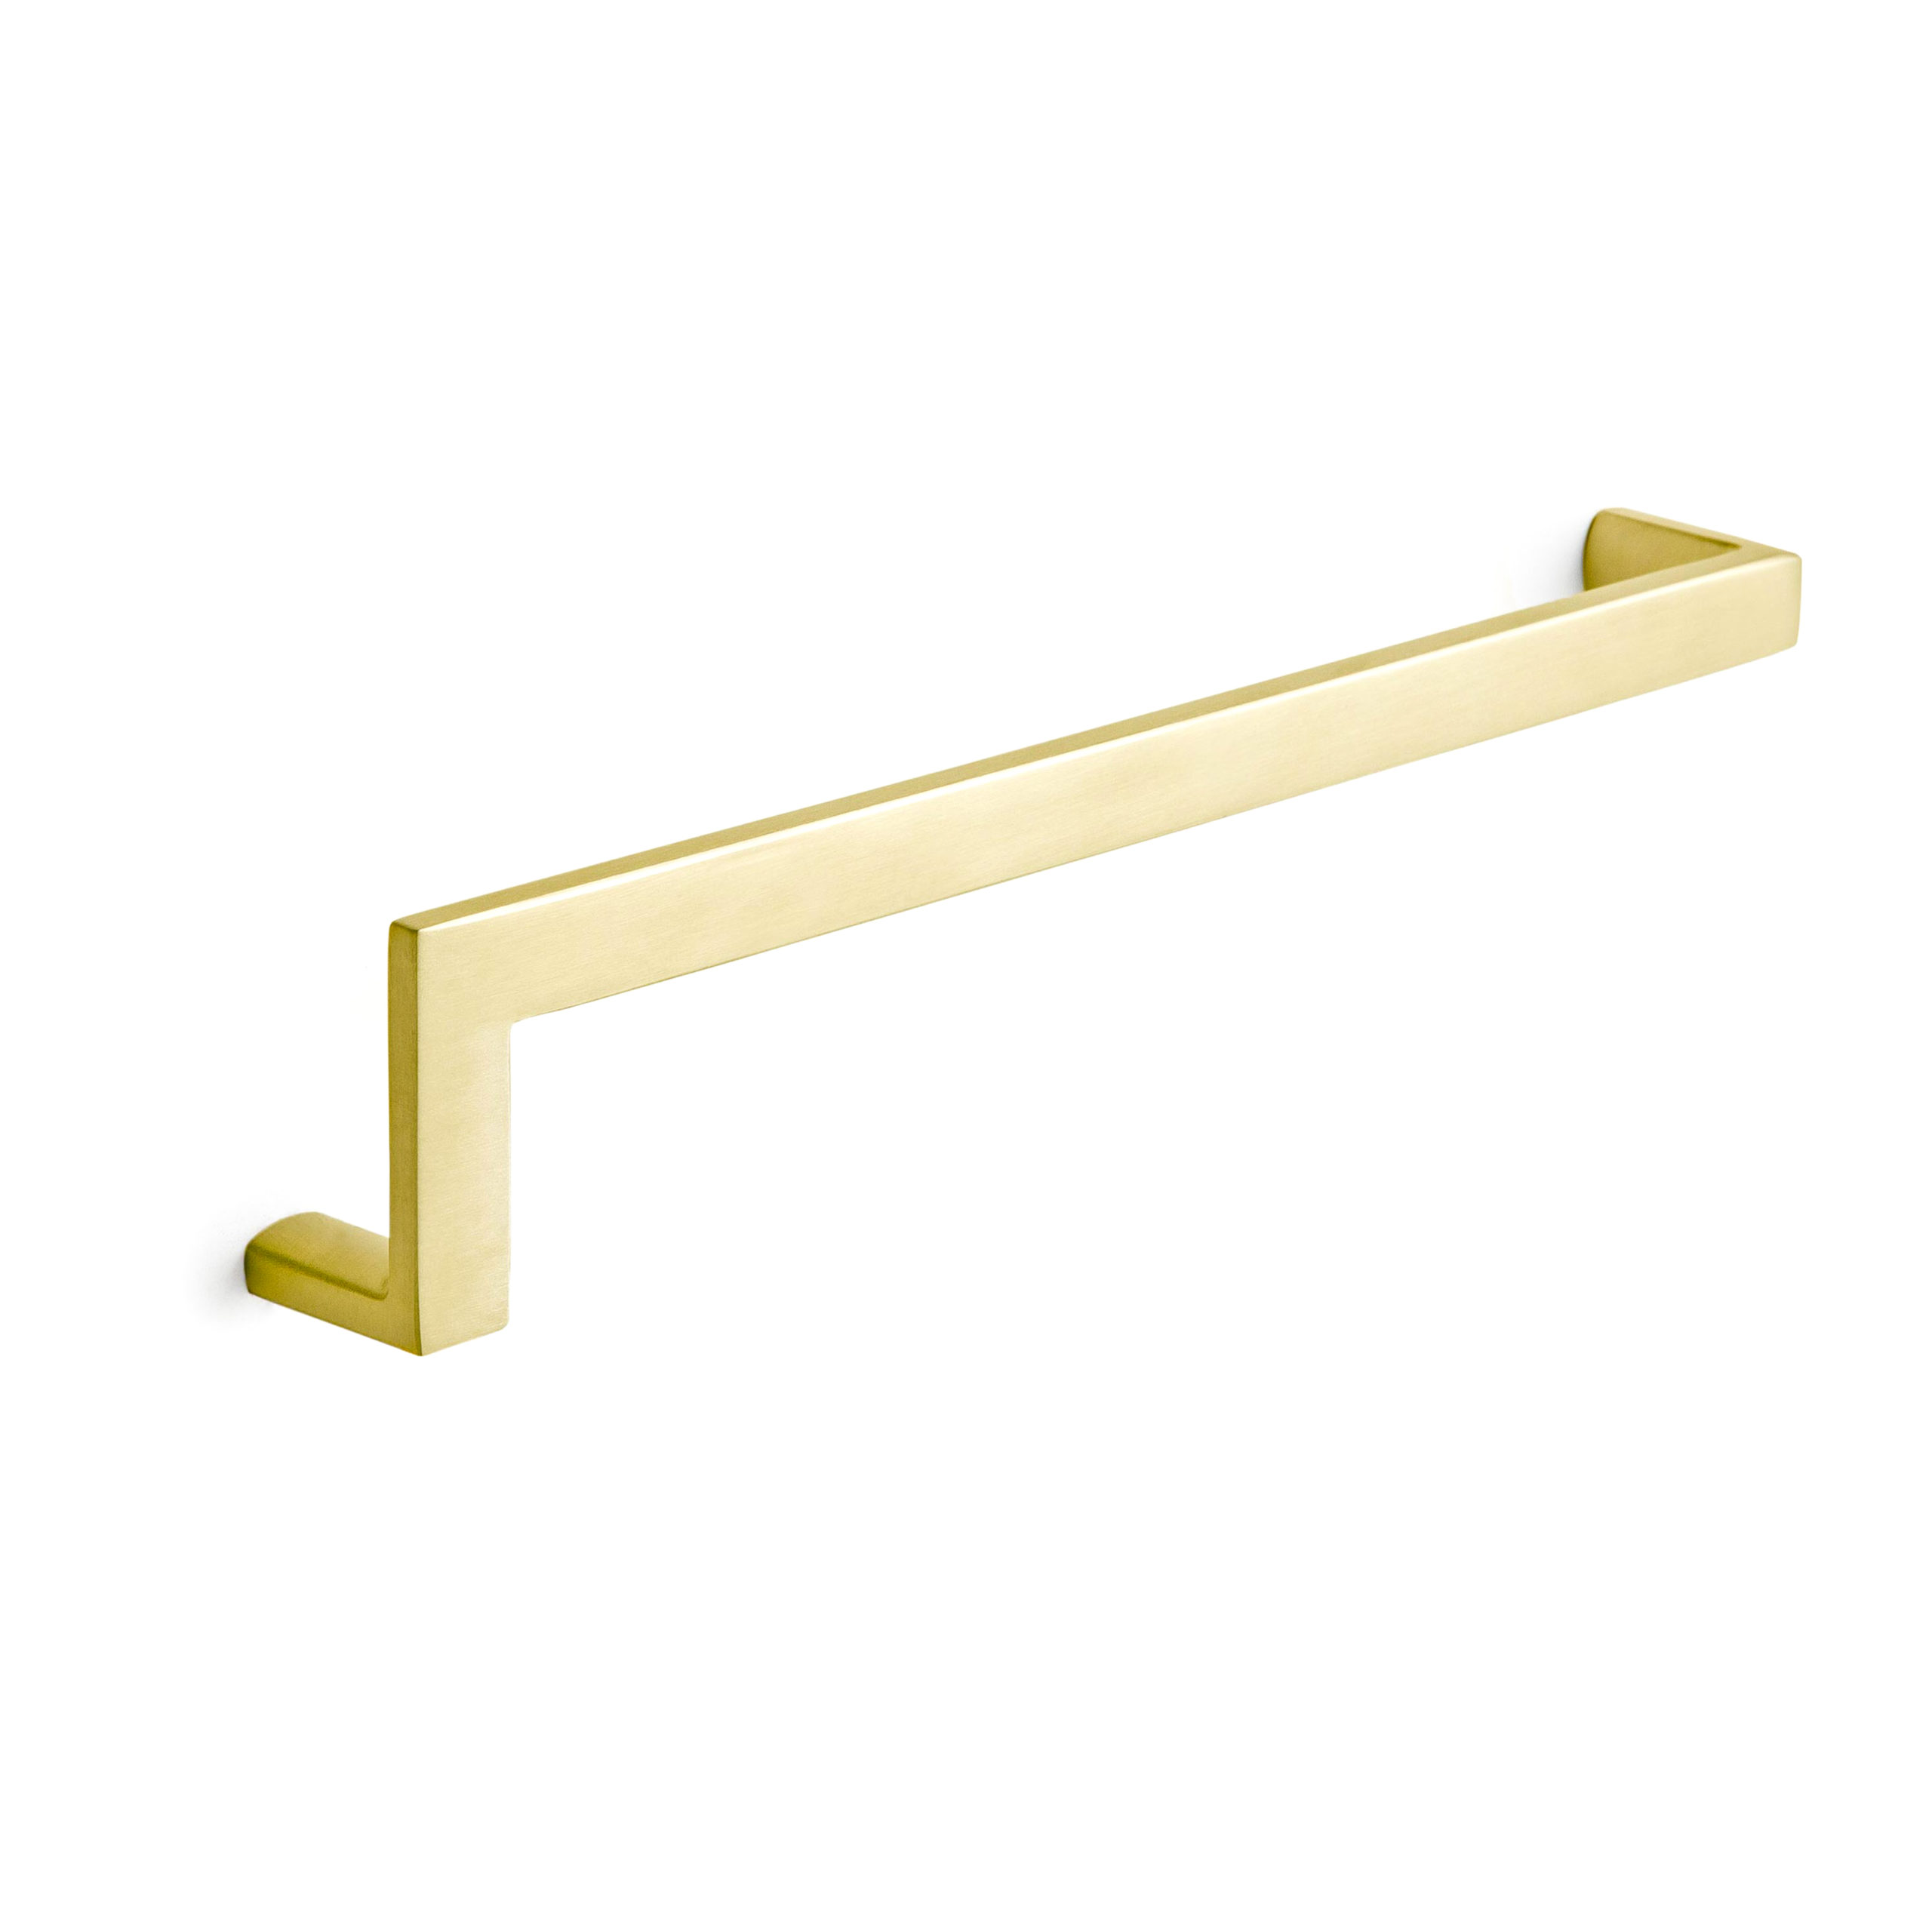 Satin brass modern cabinet door pull - product featured image - 7.5 inch 192 mm length - product SKU L 103 SBZ